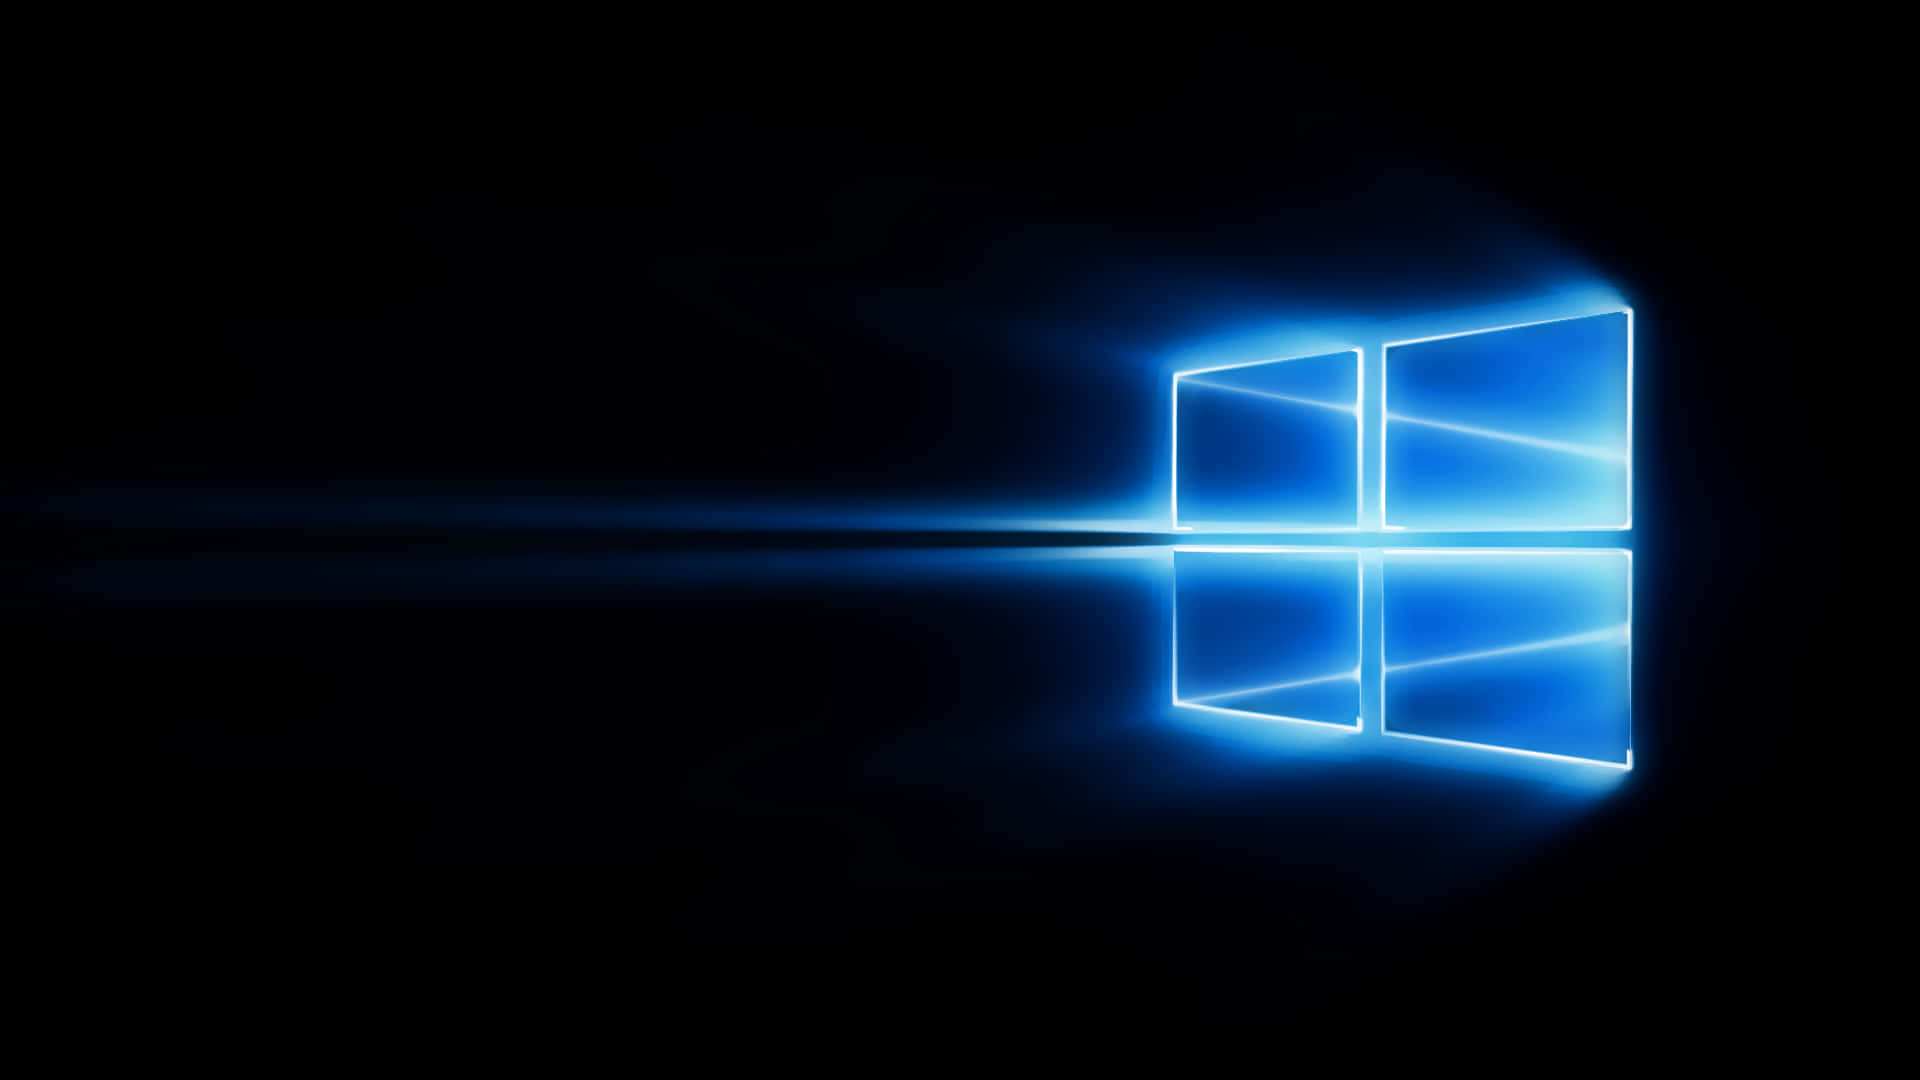 A look at the Windows 1 user interface Wallpaper